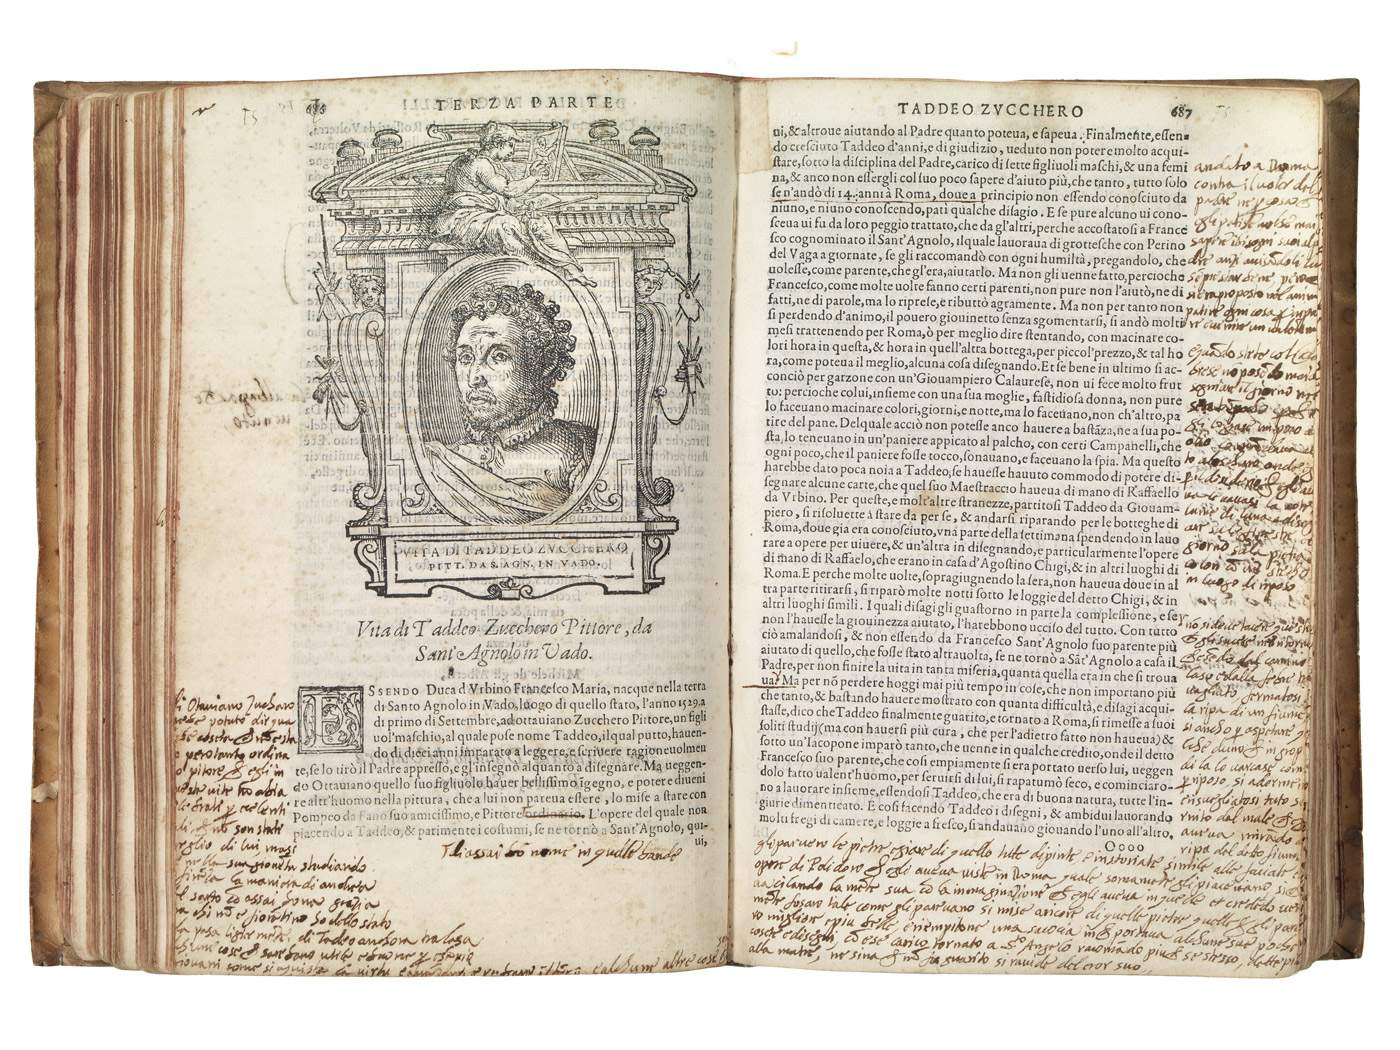 The rare copy of Vasari's Lives at auction is in public hands: bought by the City of Siena